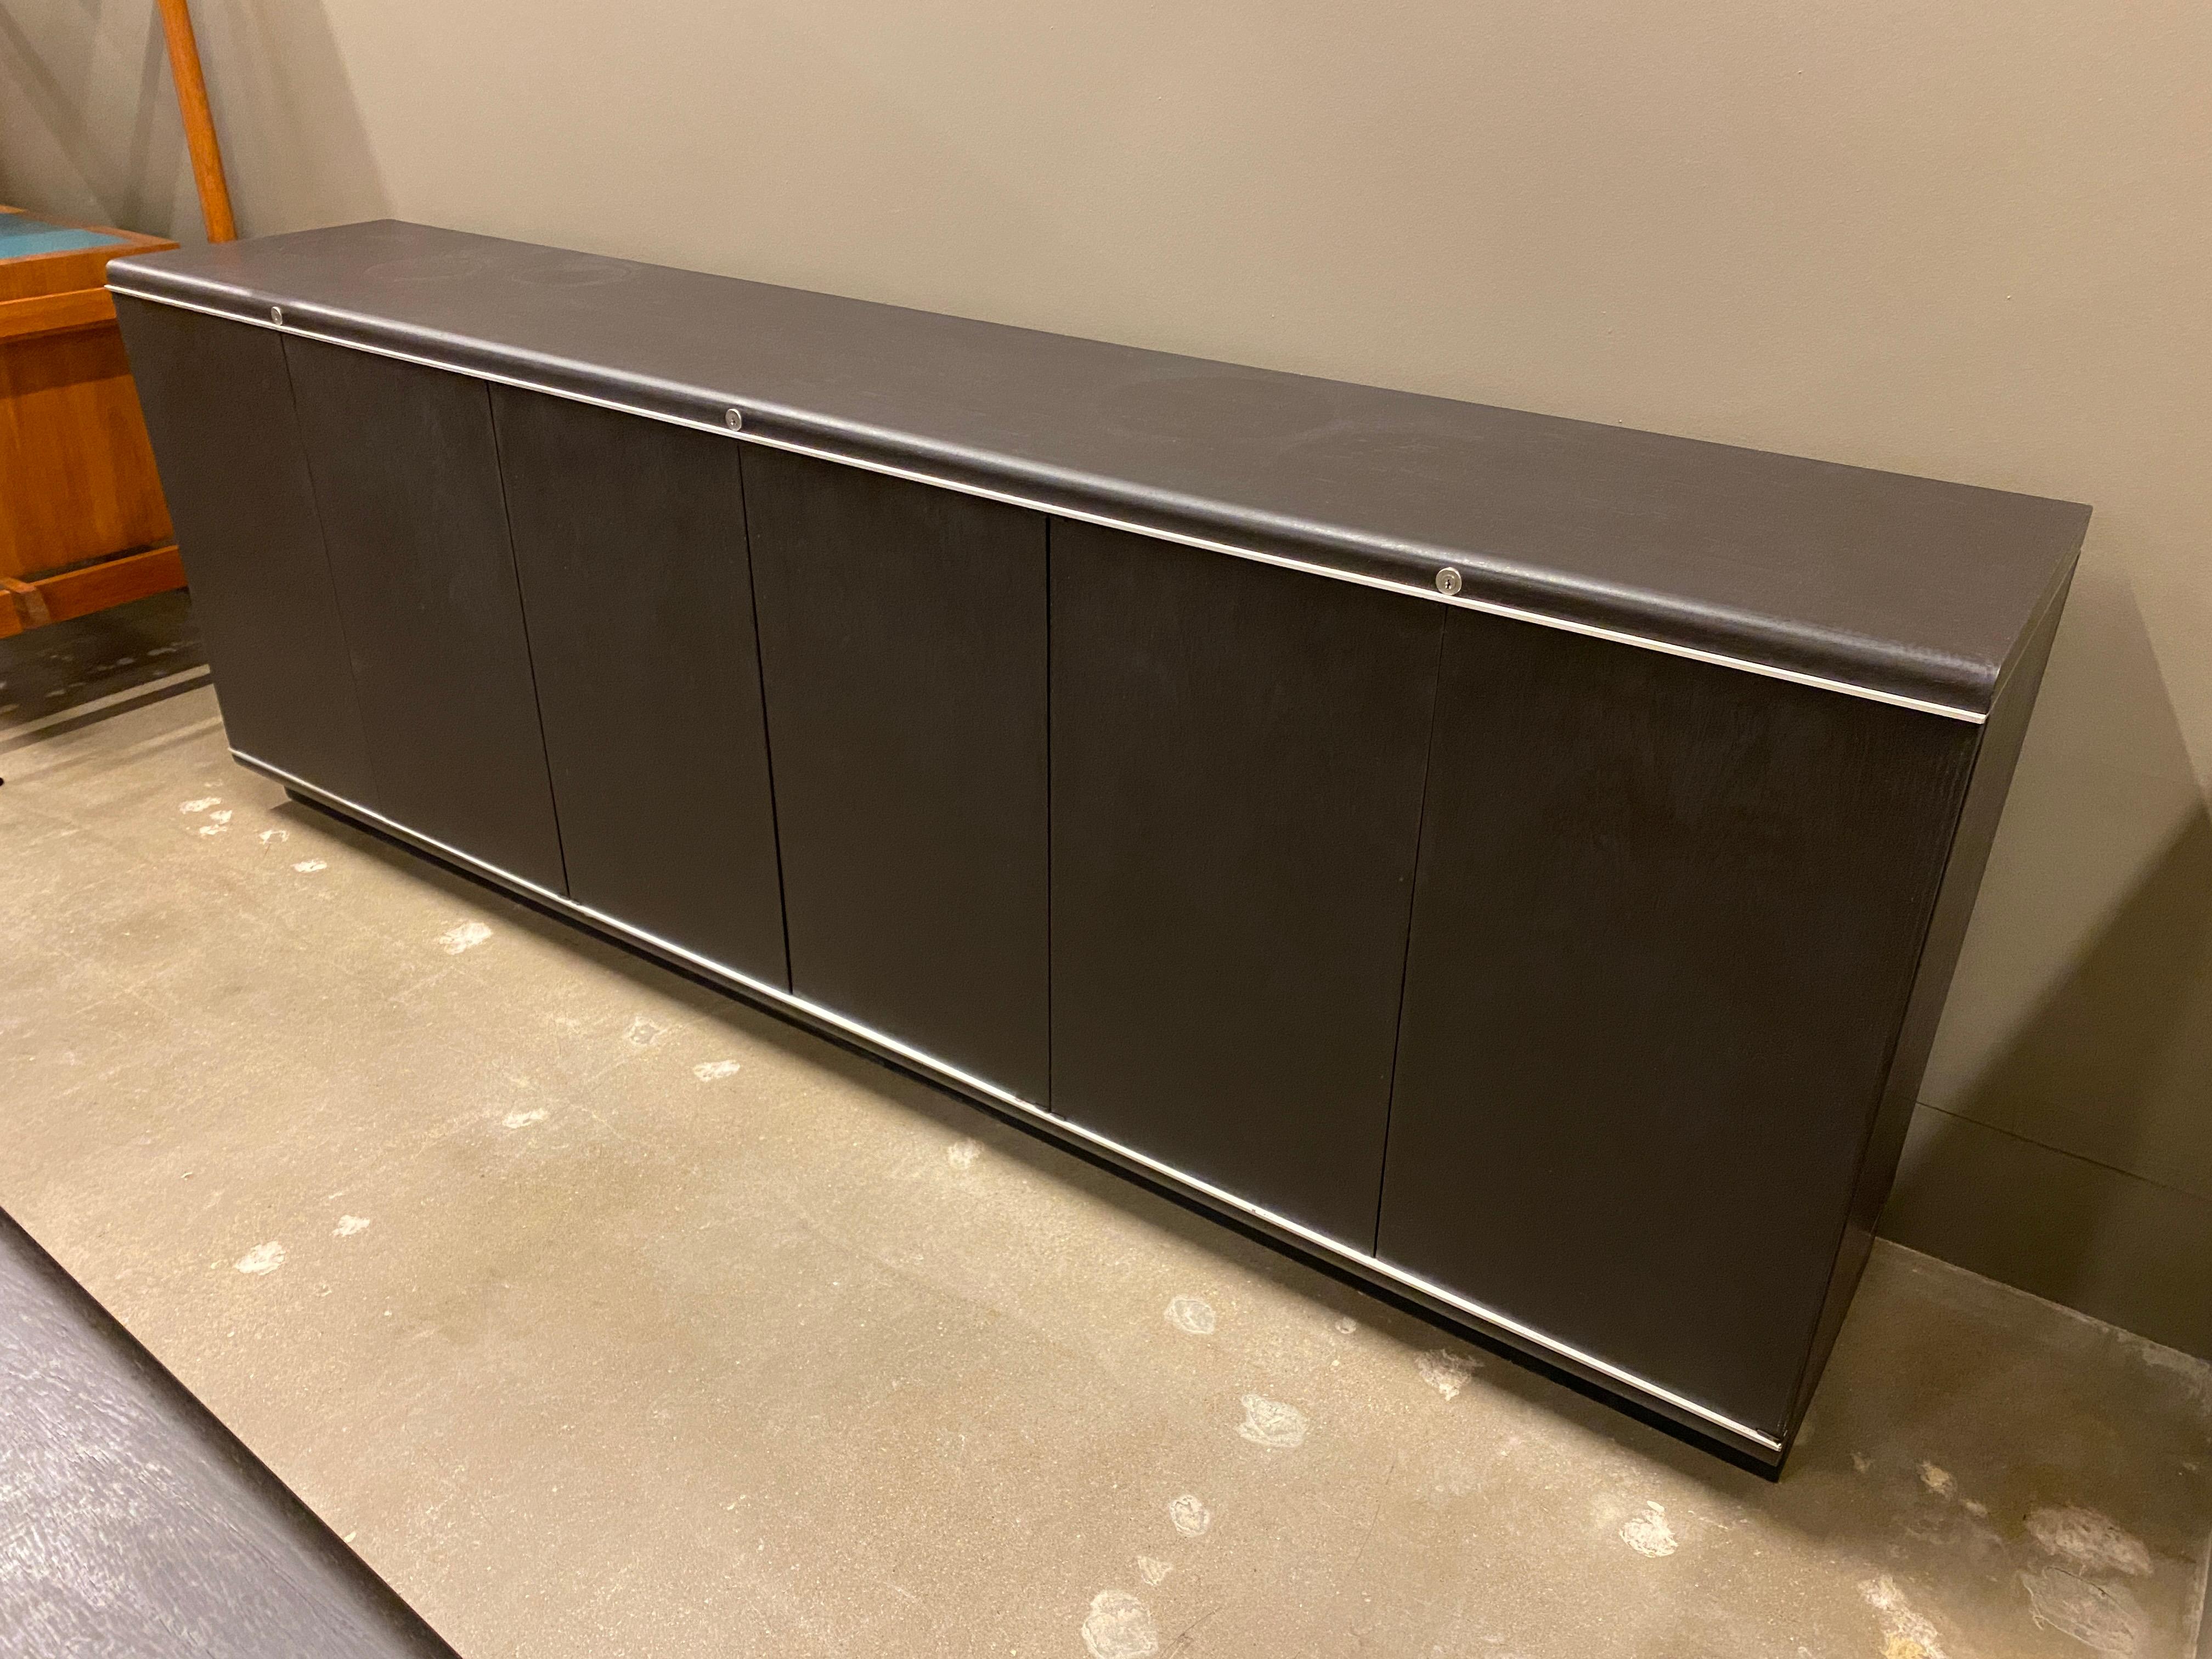 Wenge credenza with aluminum trim by Osvaldo Borsani and Eugenio Gerli for Tecno. Finish is semi-opaque very dark brown to ebony black.  See images for Tecno label, Italy, 1970s.
